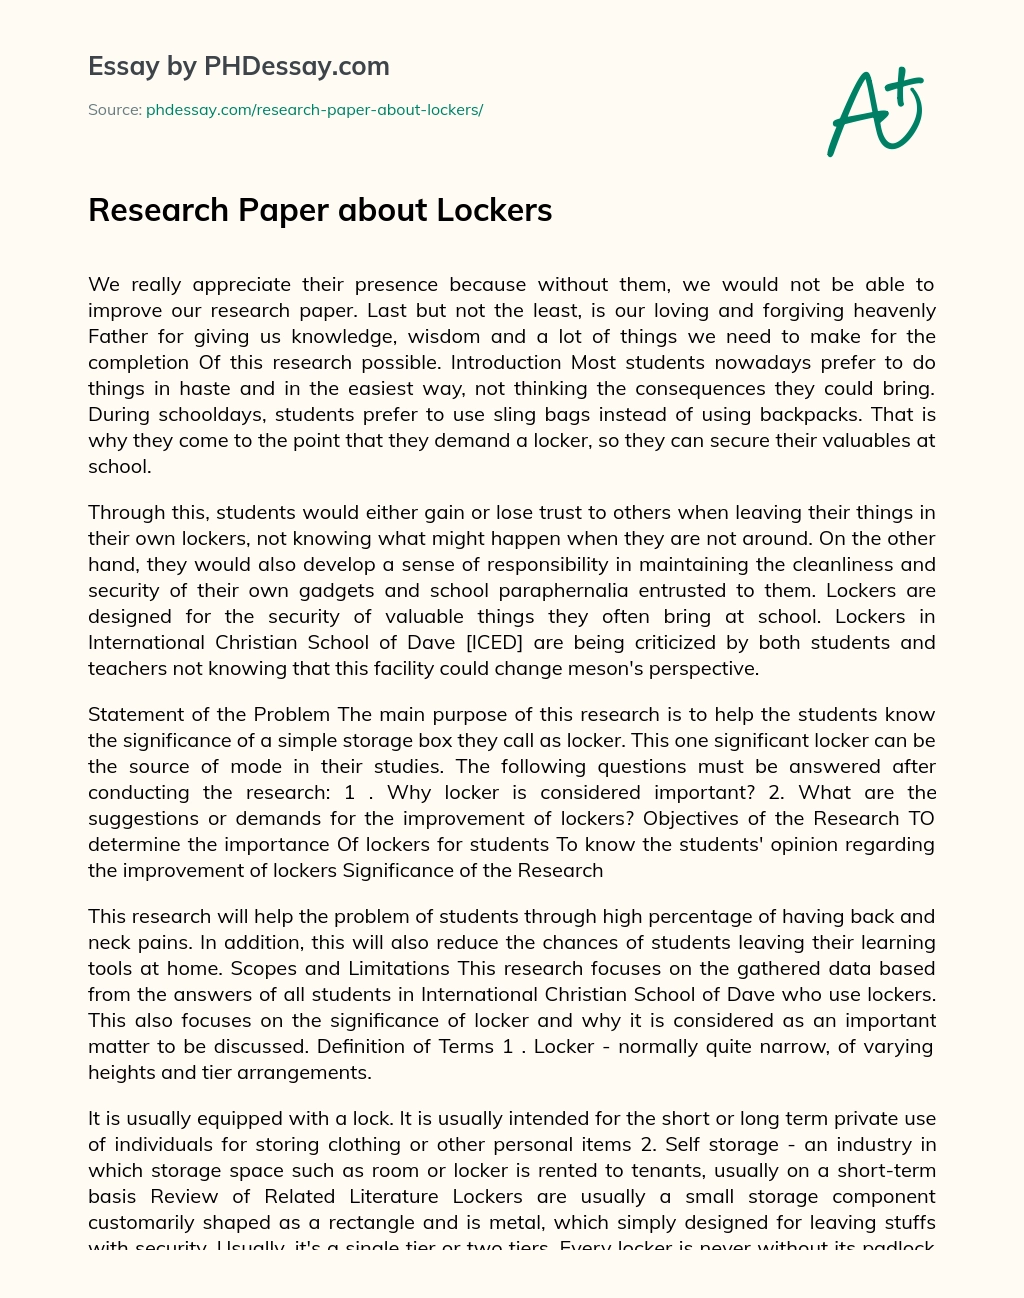 Research Paper about Lockers essay